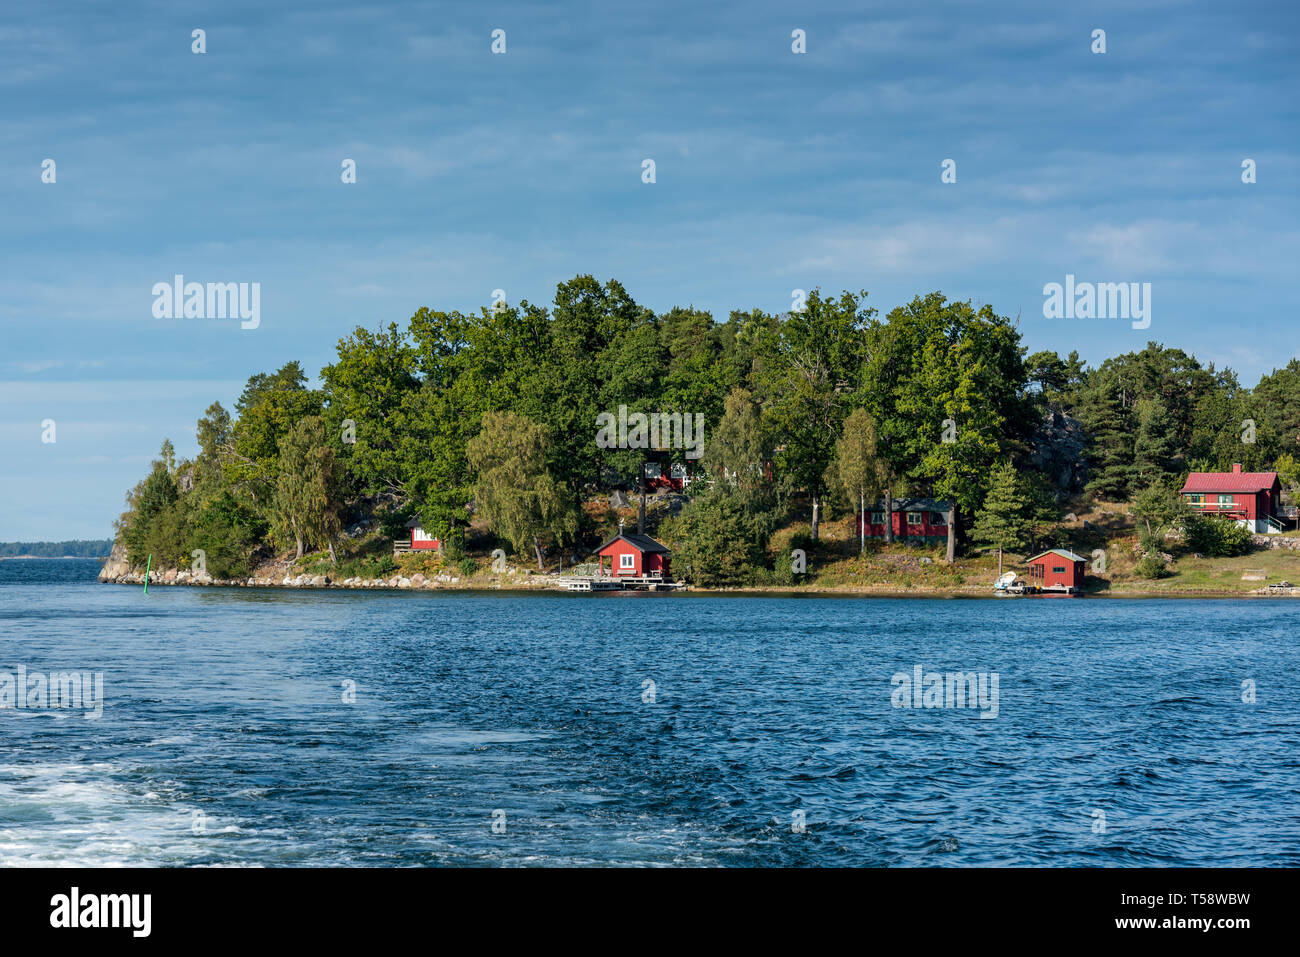 Traditional small red fishermen's cottages and holiday homes line the waterfront of a small islet in the Stockholm archipelago Stock Photo